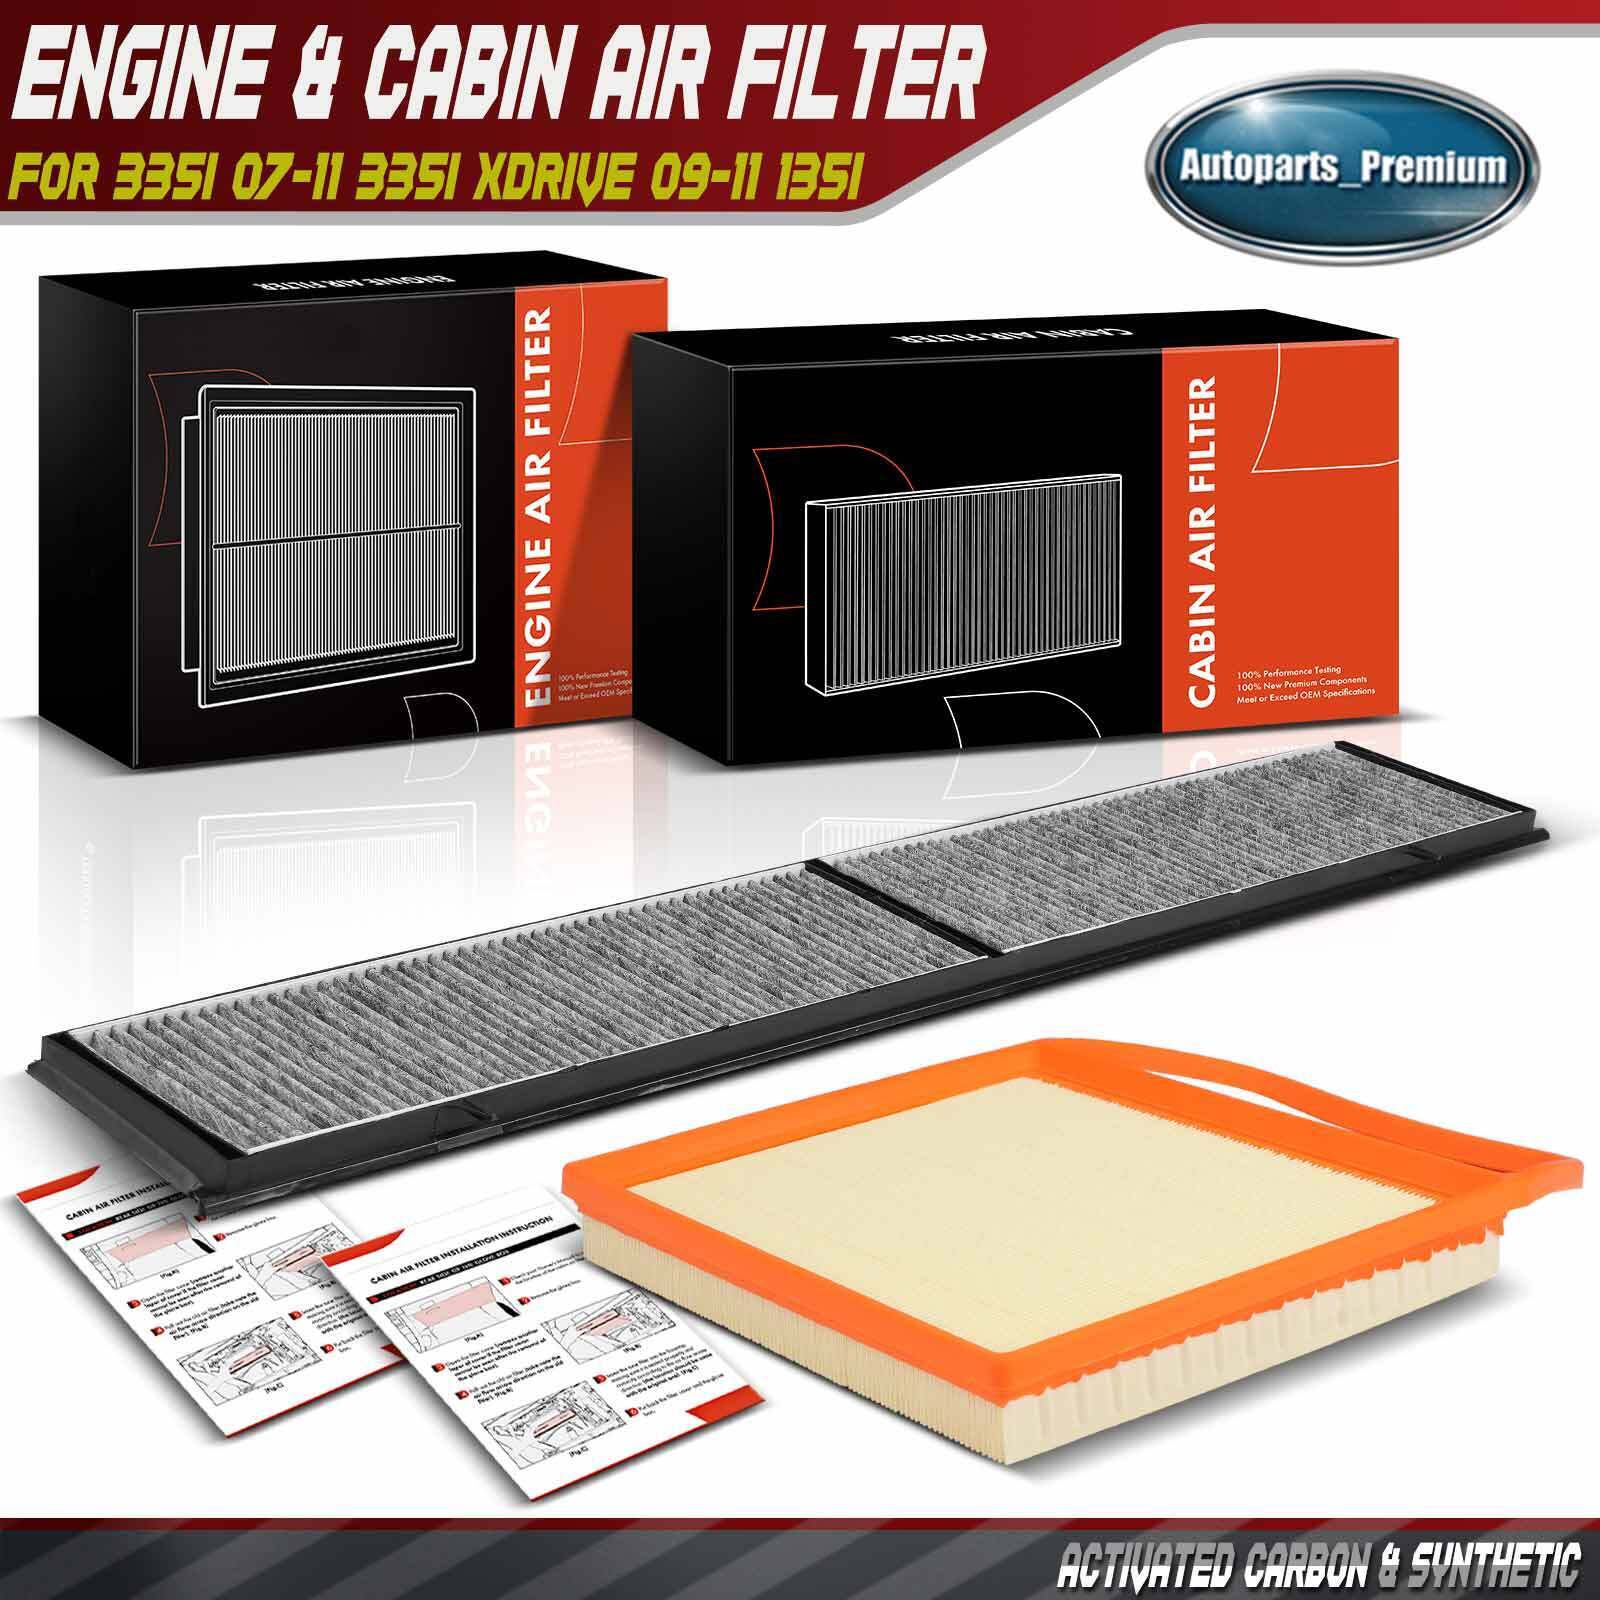 Engine & Activated Carbon Cabin Air Filter for 335i 07-11 335i xDrive 09-11 135i